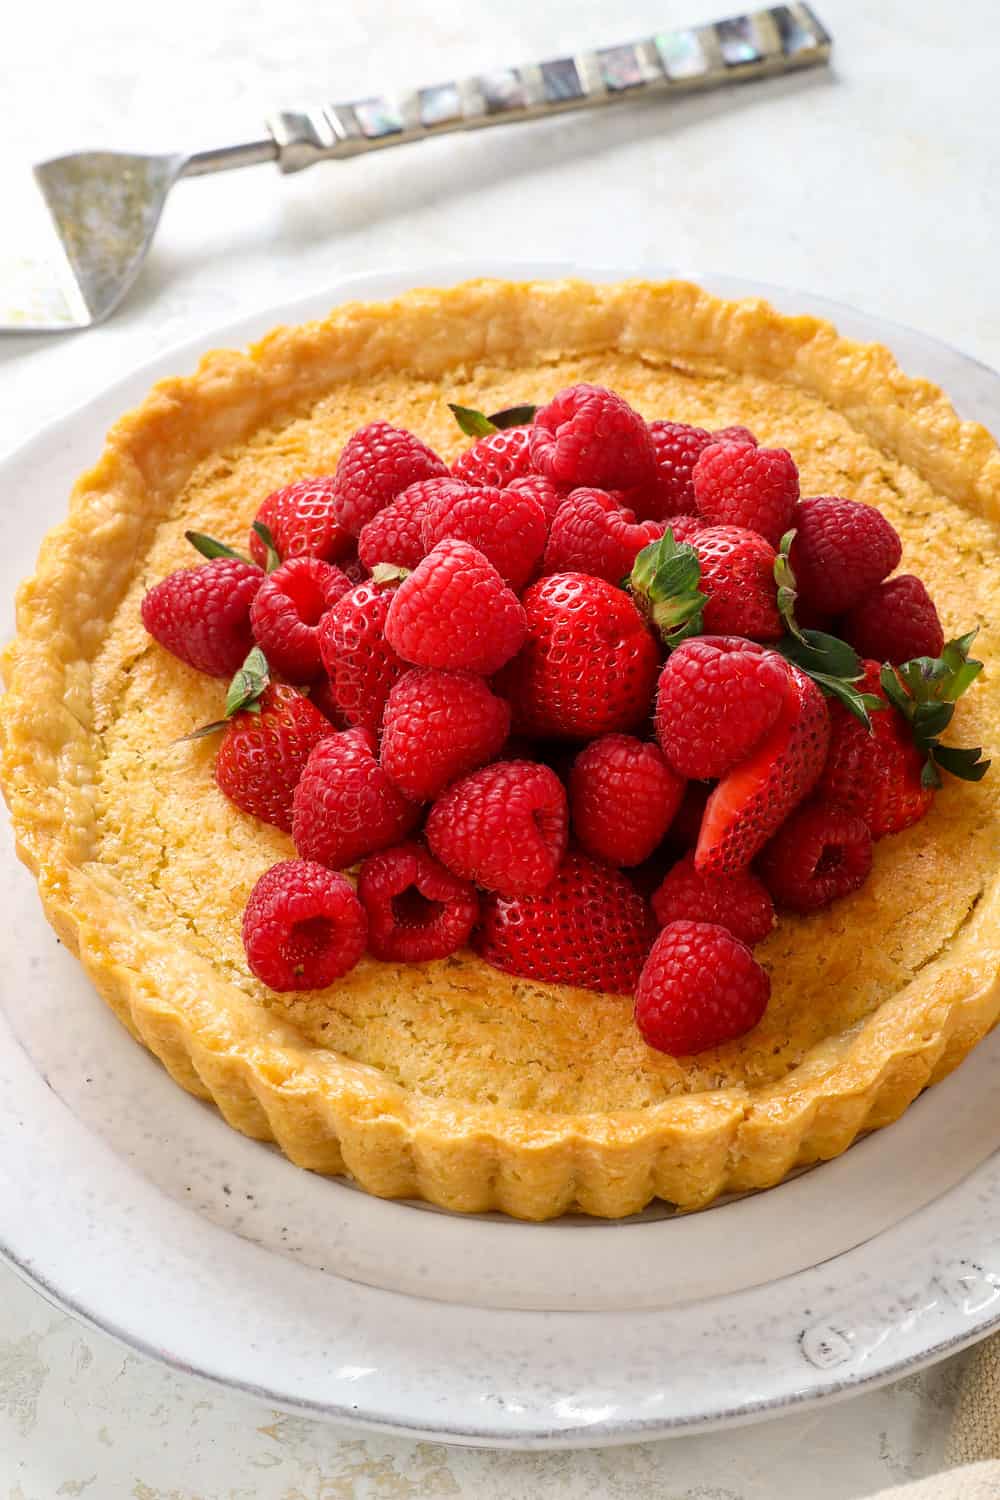 Coconut pie recipe with a pie crust, toasted coconut top, custard filling garnished by strawberries